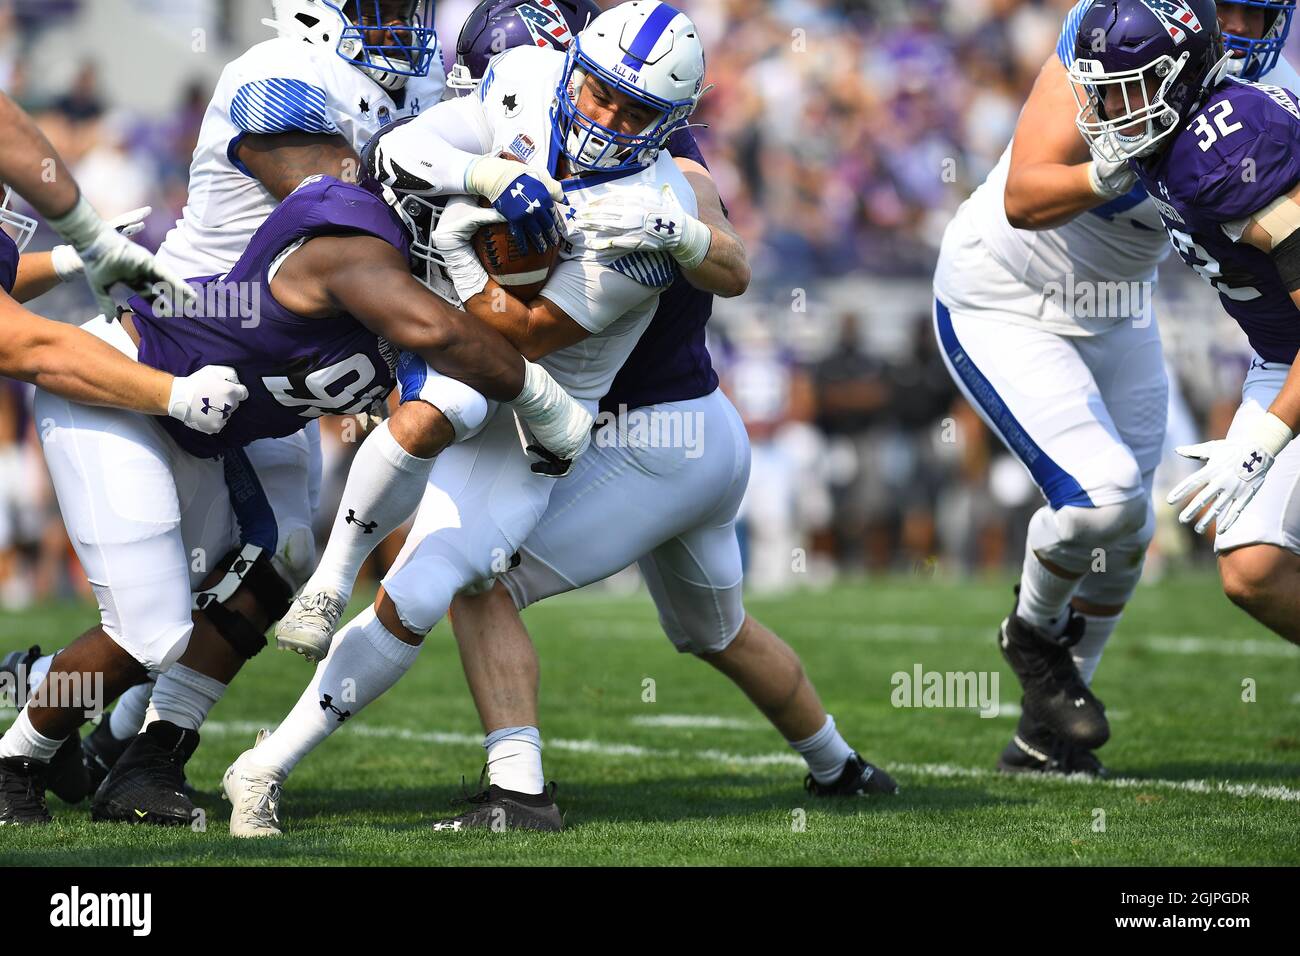 Evanston, Illinois, USA. 11th Sep, 2021. Peterson Kerlegrand #9 of the Indiana State Sycamores in action during the NCAA football game between the Northwestern Wildcats vs Indiana State Sycamores at Ryan Field in Evanston, Illinois. Dean Reid/CSM/Alamy Live News Stock Photo